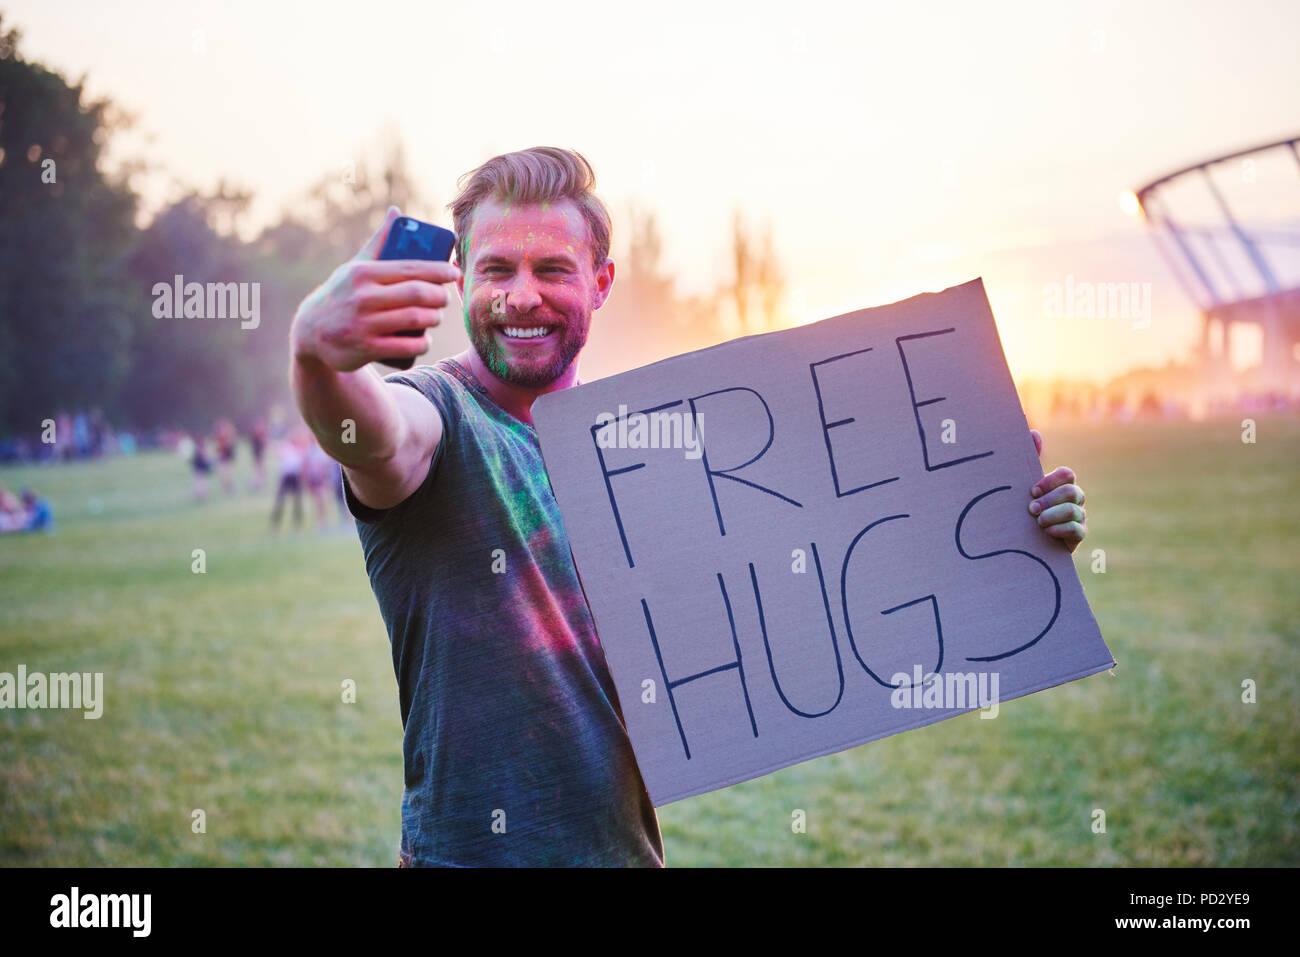 Young man taking selfie holding free hugs sign at Holi Festival Stock Photo